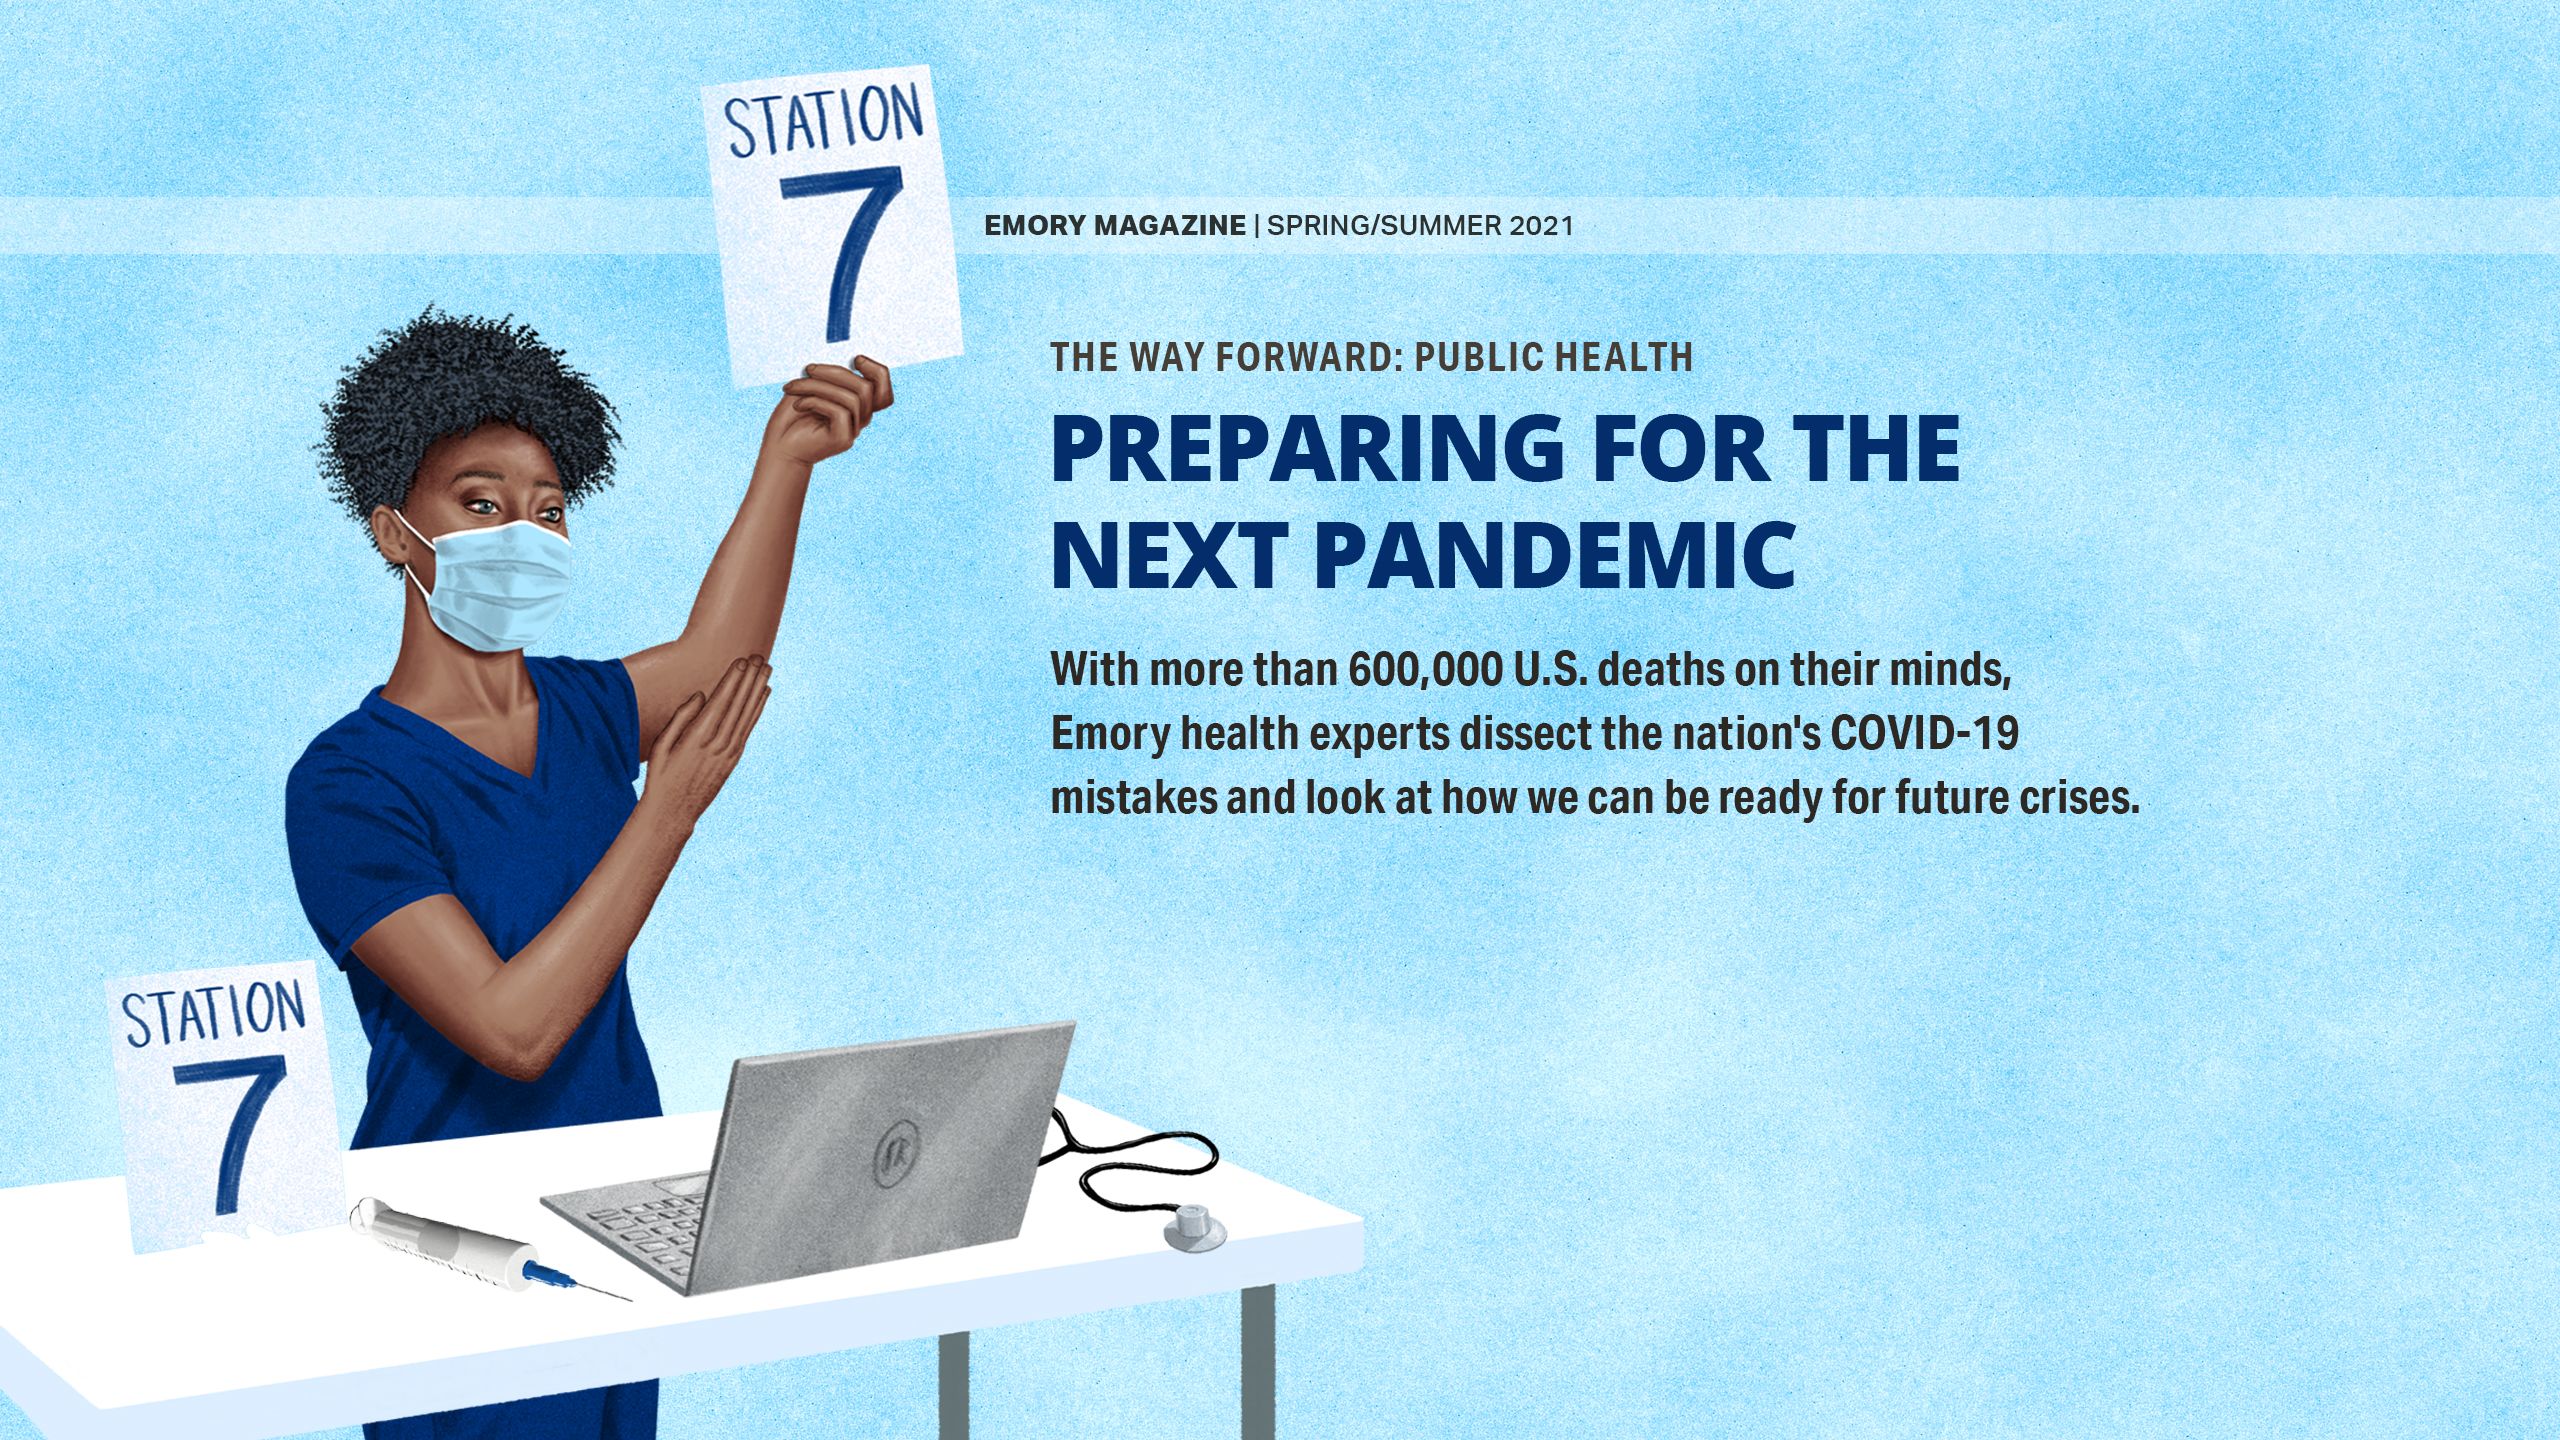 Preparing for the Next Pandemic With more than 570,000 U.S. deaths on their minds, Emory health experts dissect the nation's COVID-19 mistakes and look at how we can be ready for future crises. 